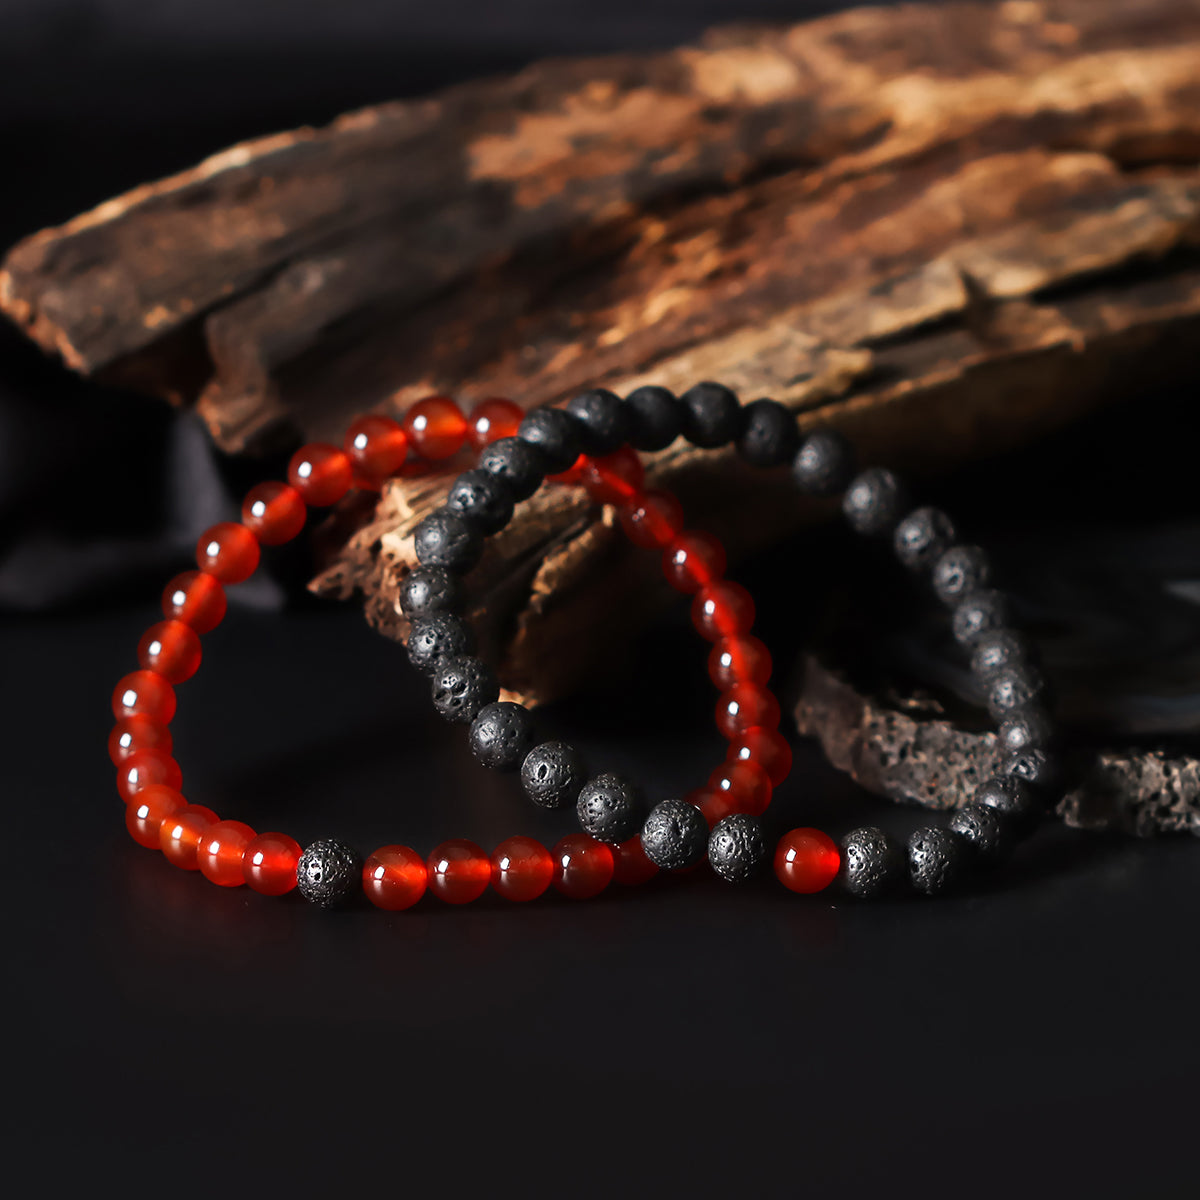 Artistic close-up of the Natural Red Onyx & Lava Gemstone Bracelet. A captivating shot capturing the rich red hues of Onyx and the raw elegance of lava gemstones, creating a unique and eye-catching composition.